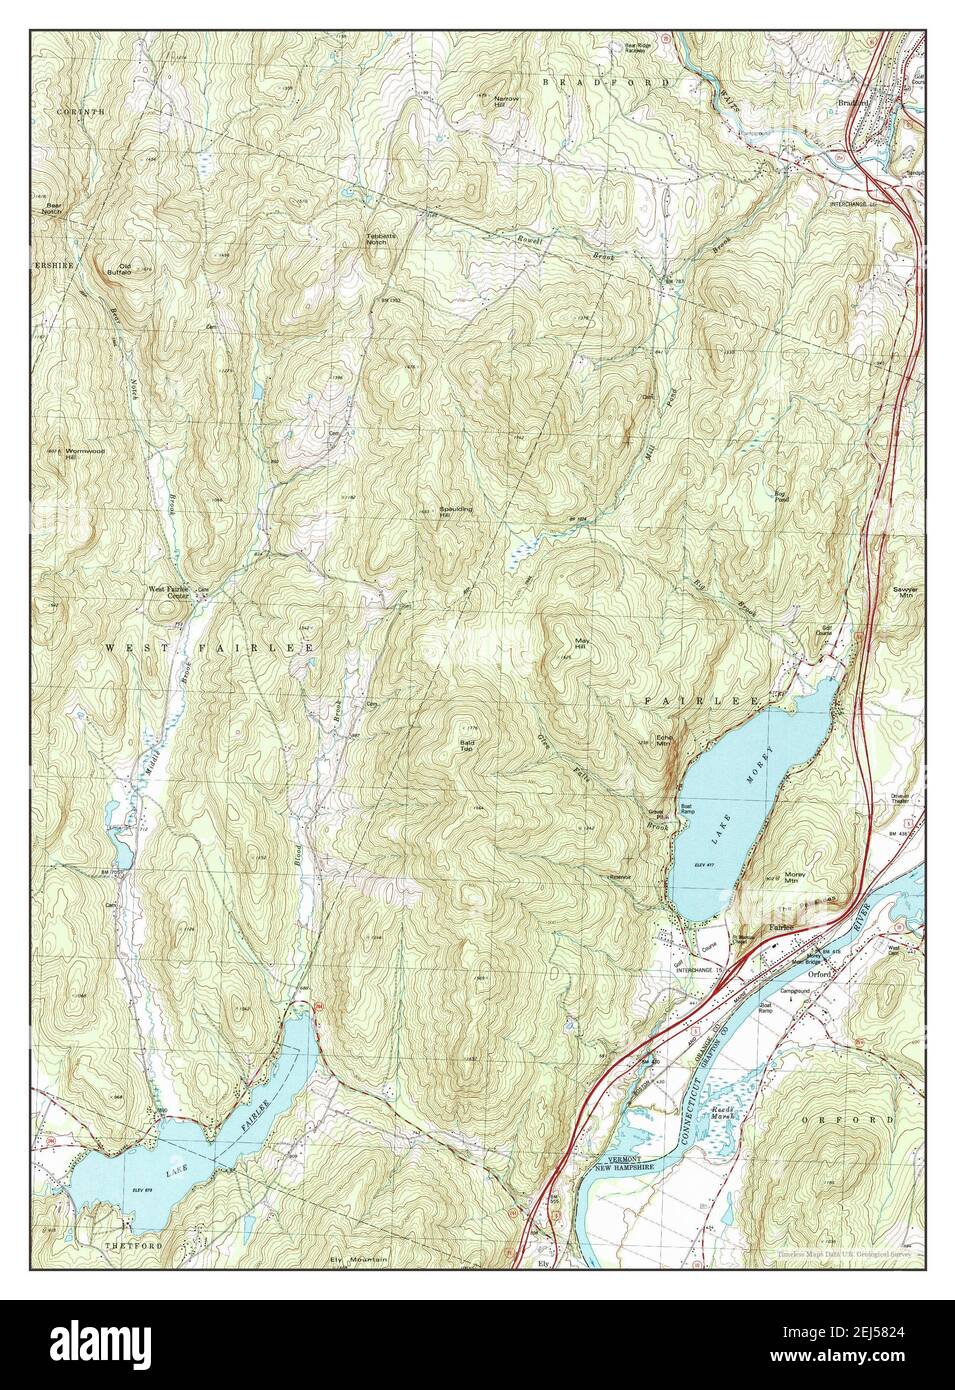 Fairlee, Vermont, map 1981, 1:24000, United States of America by Timeless Maps, data U.S. Geological Survey Stock Photo